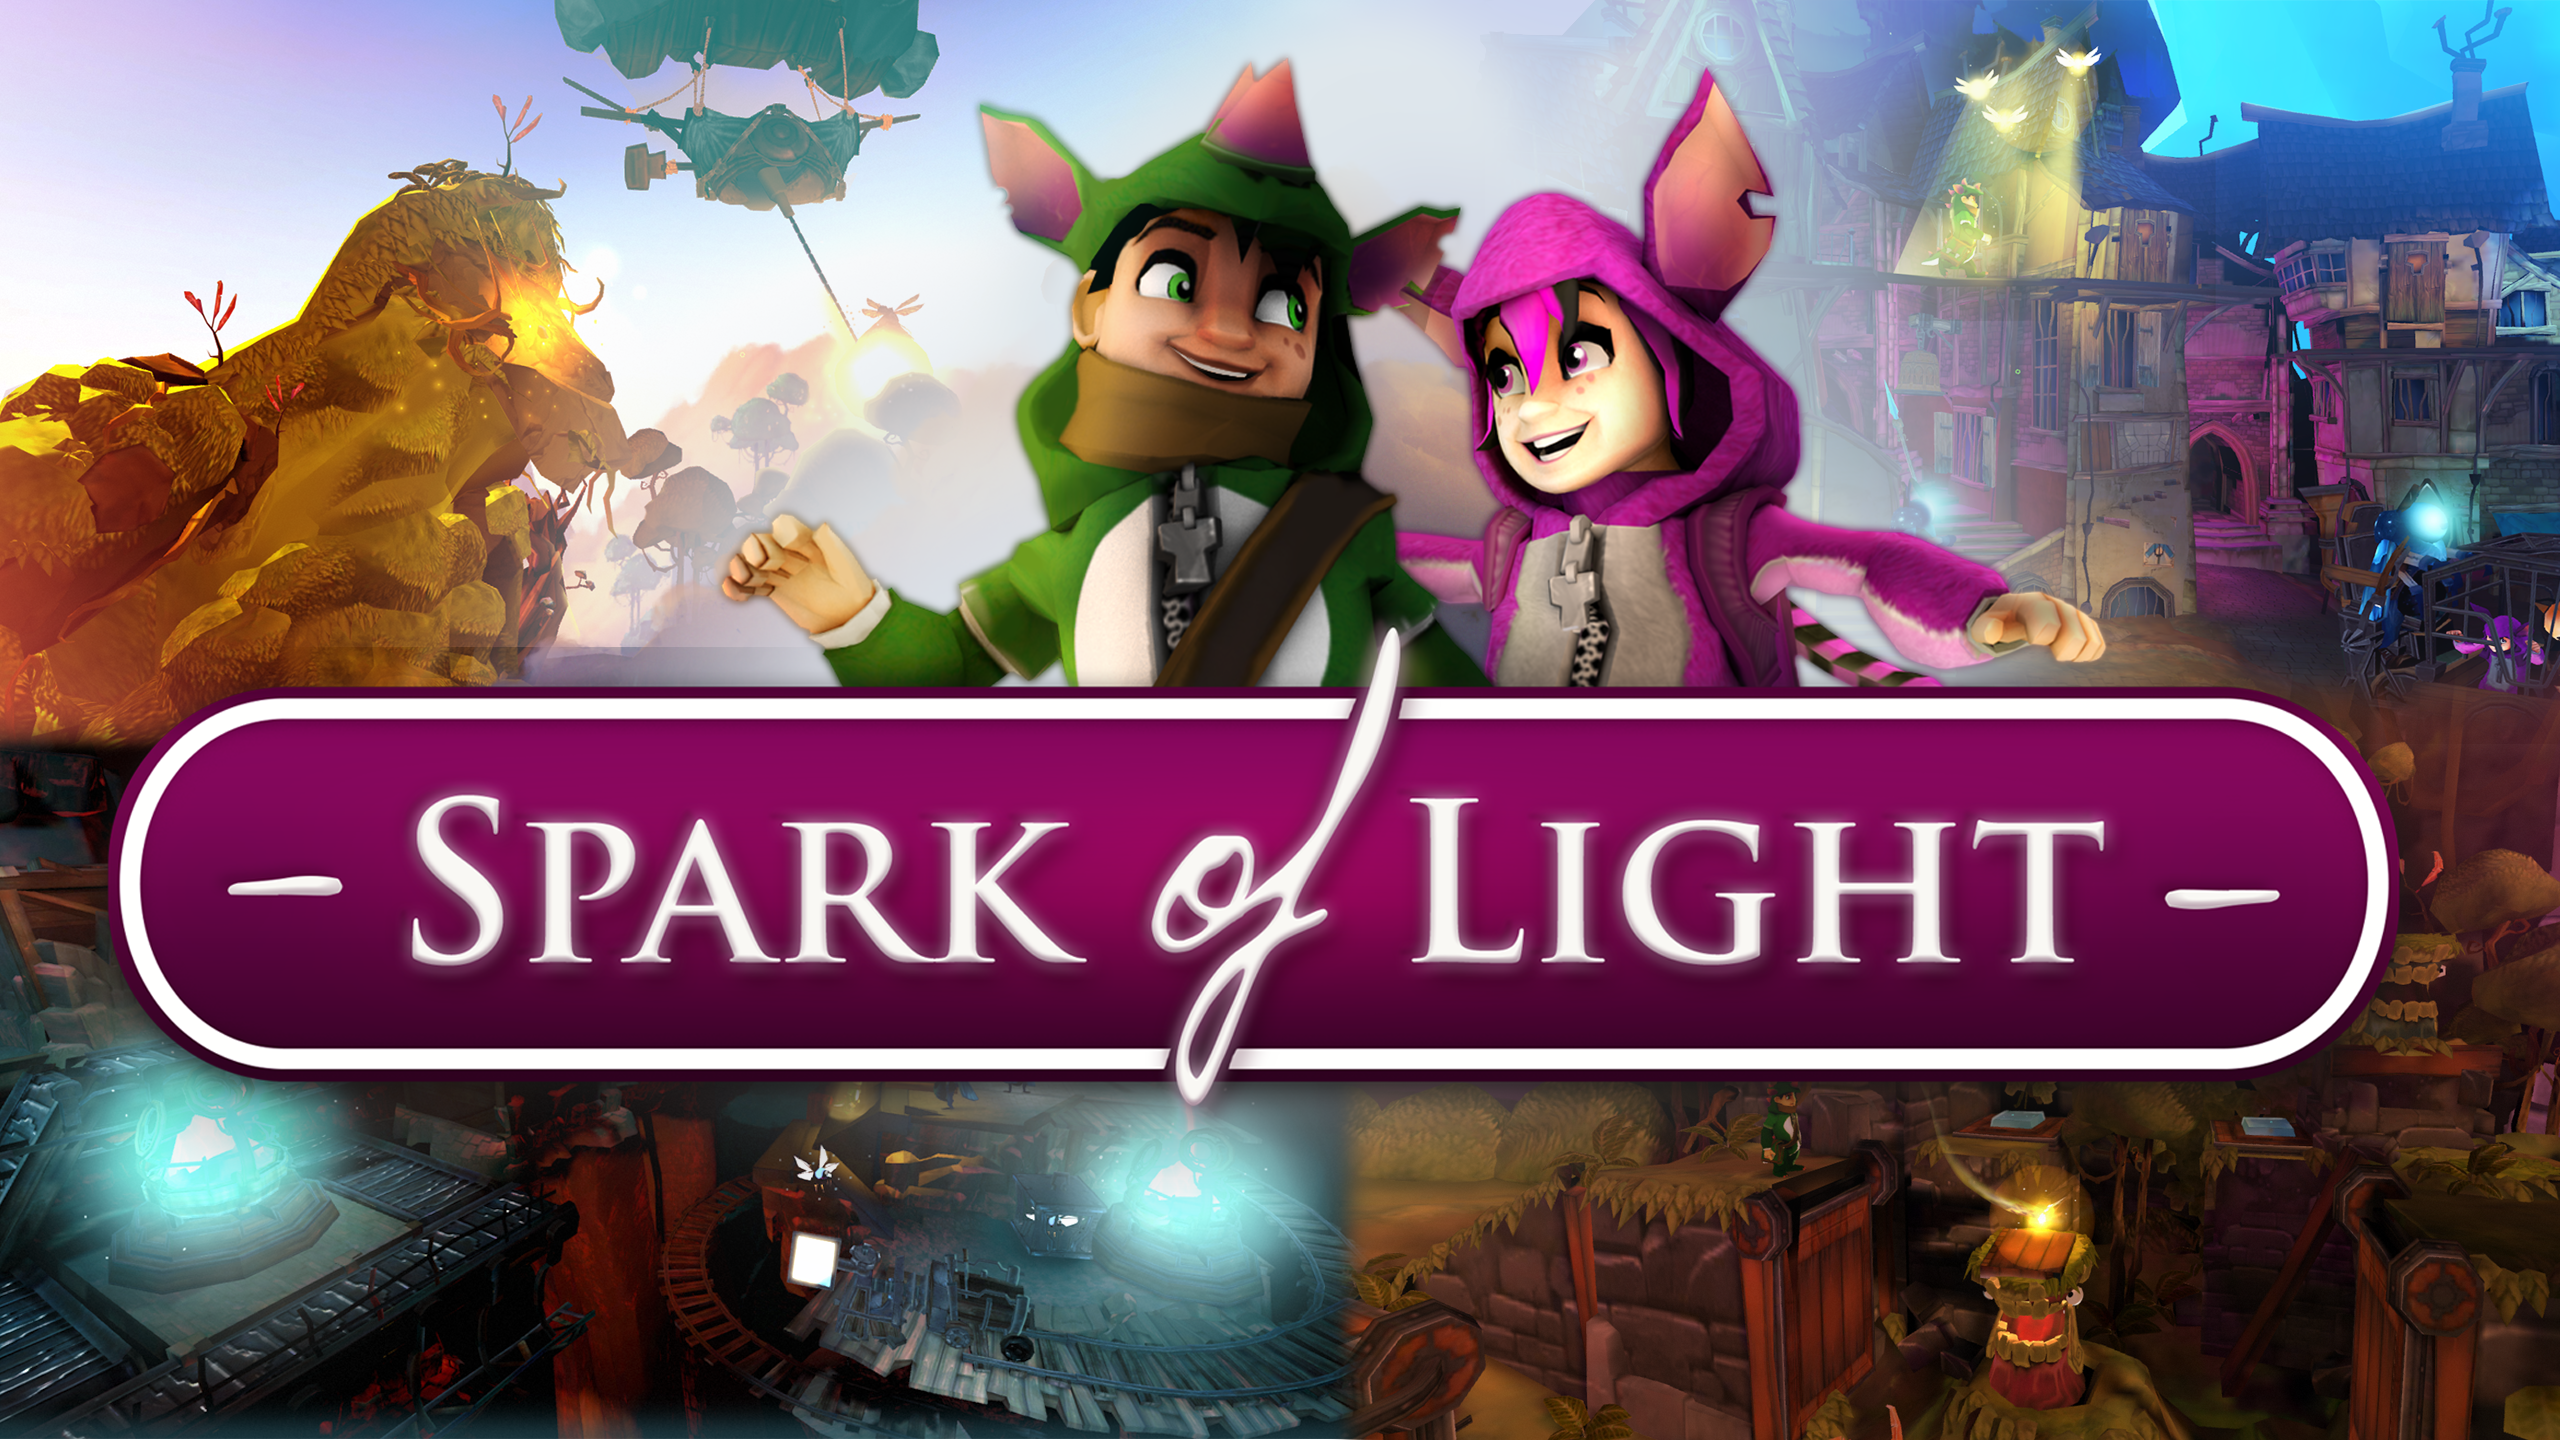 Spark of Light review: a nice light puzzle for Gear VR